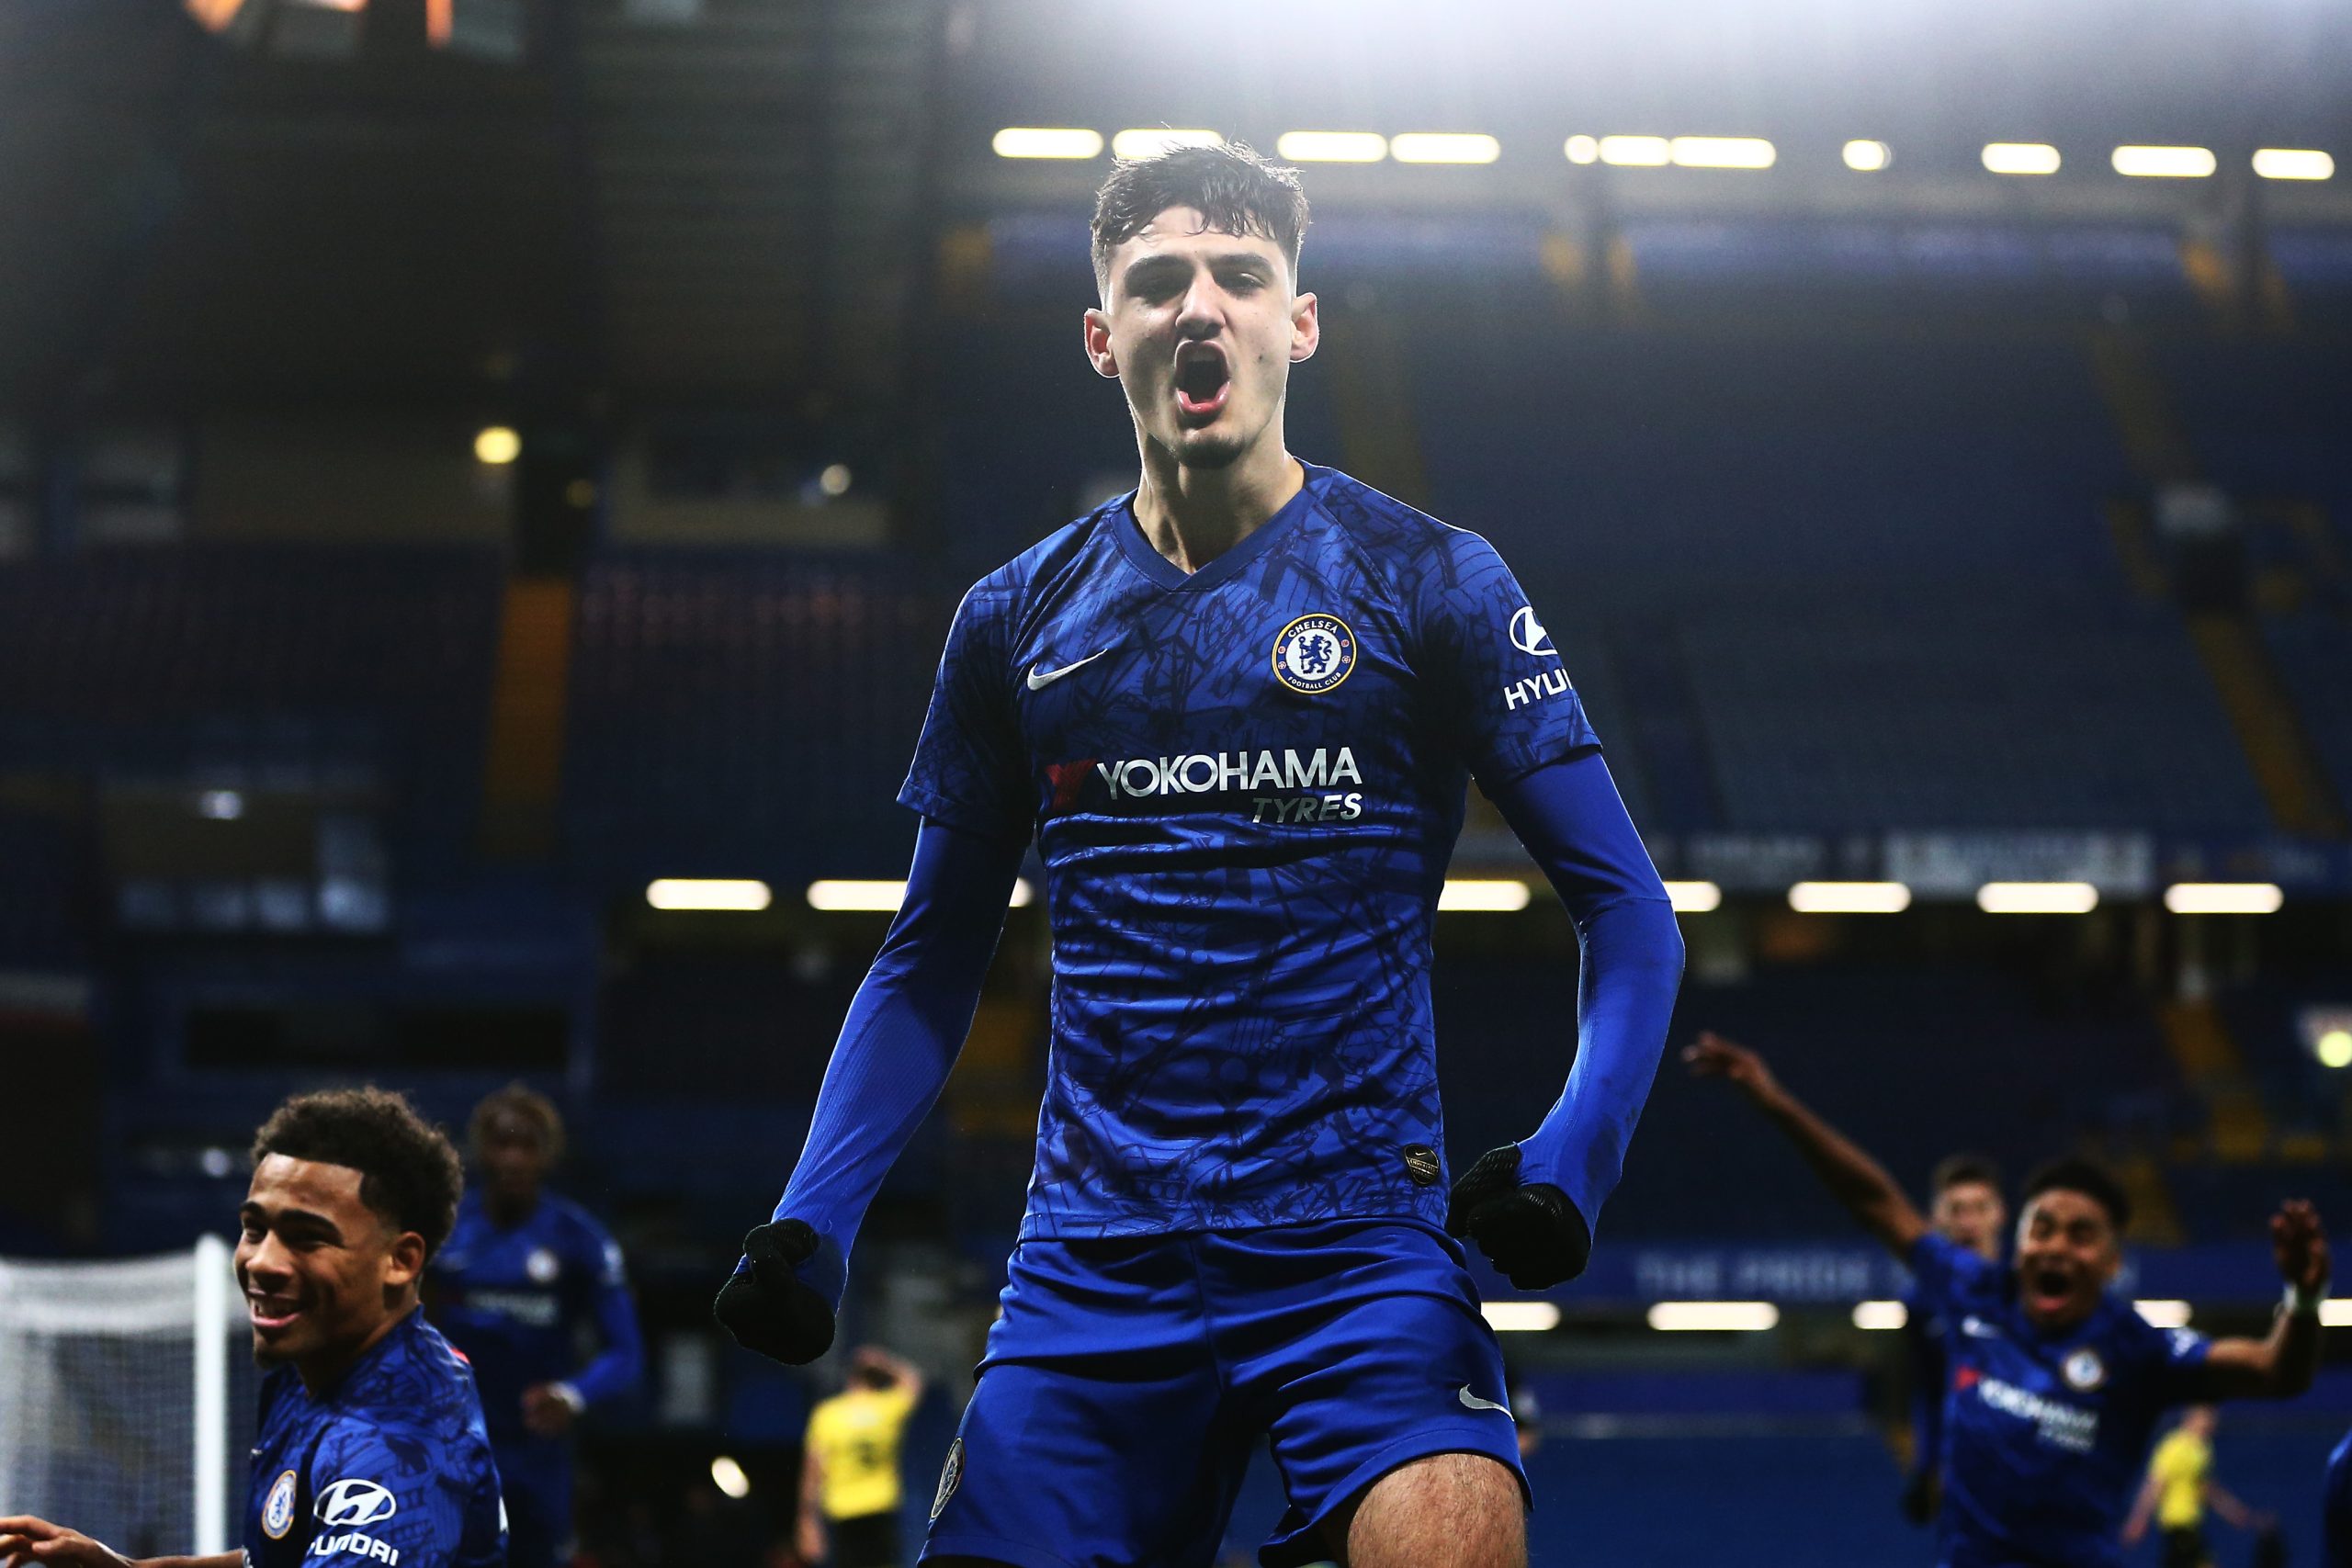 Chelsea considering a move to sign 20-year-old striker with 22 senior goals to his name